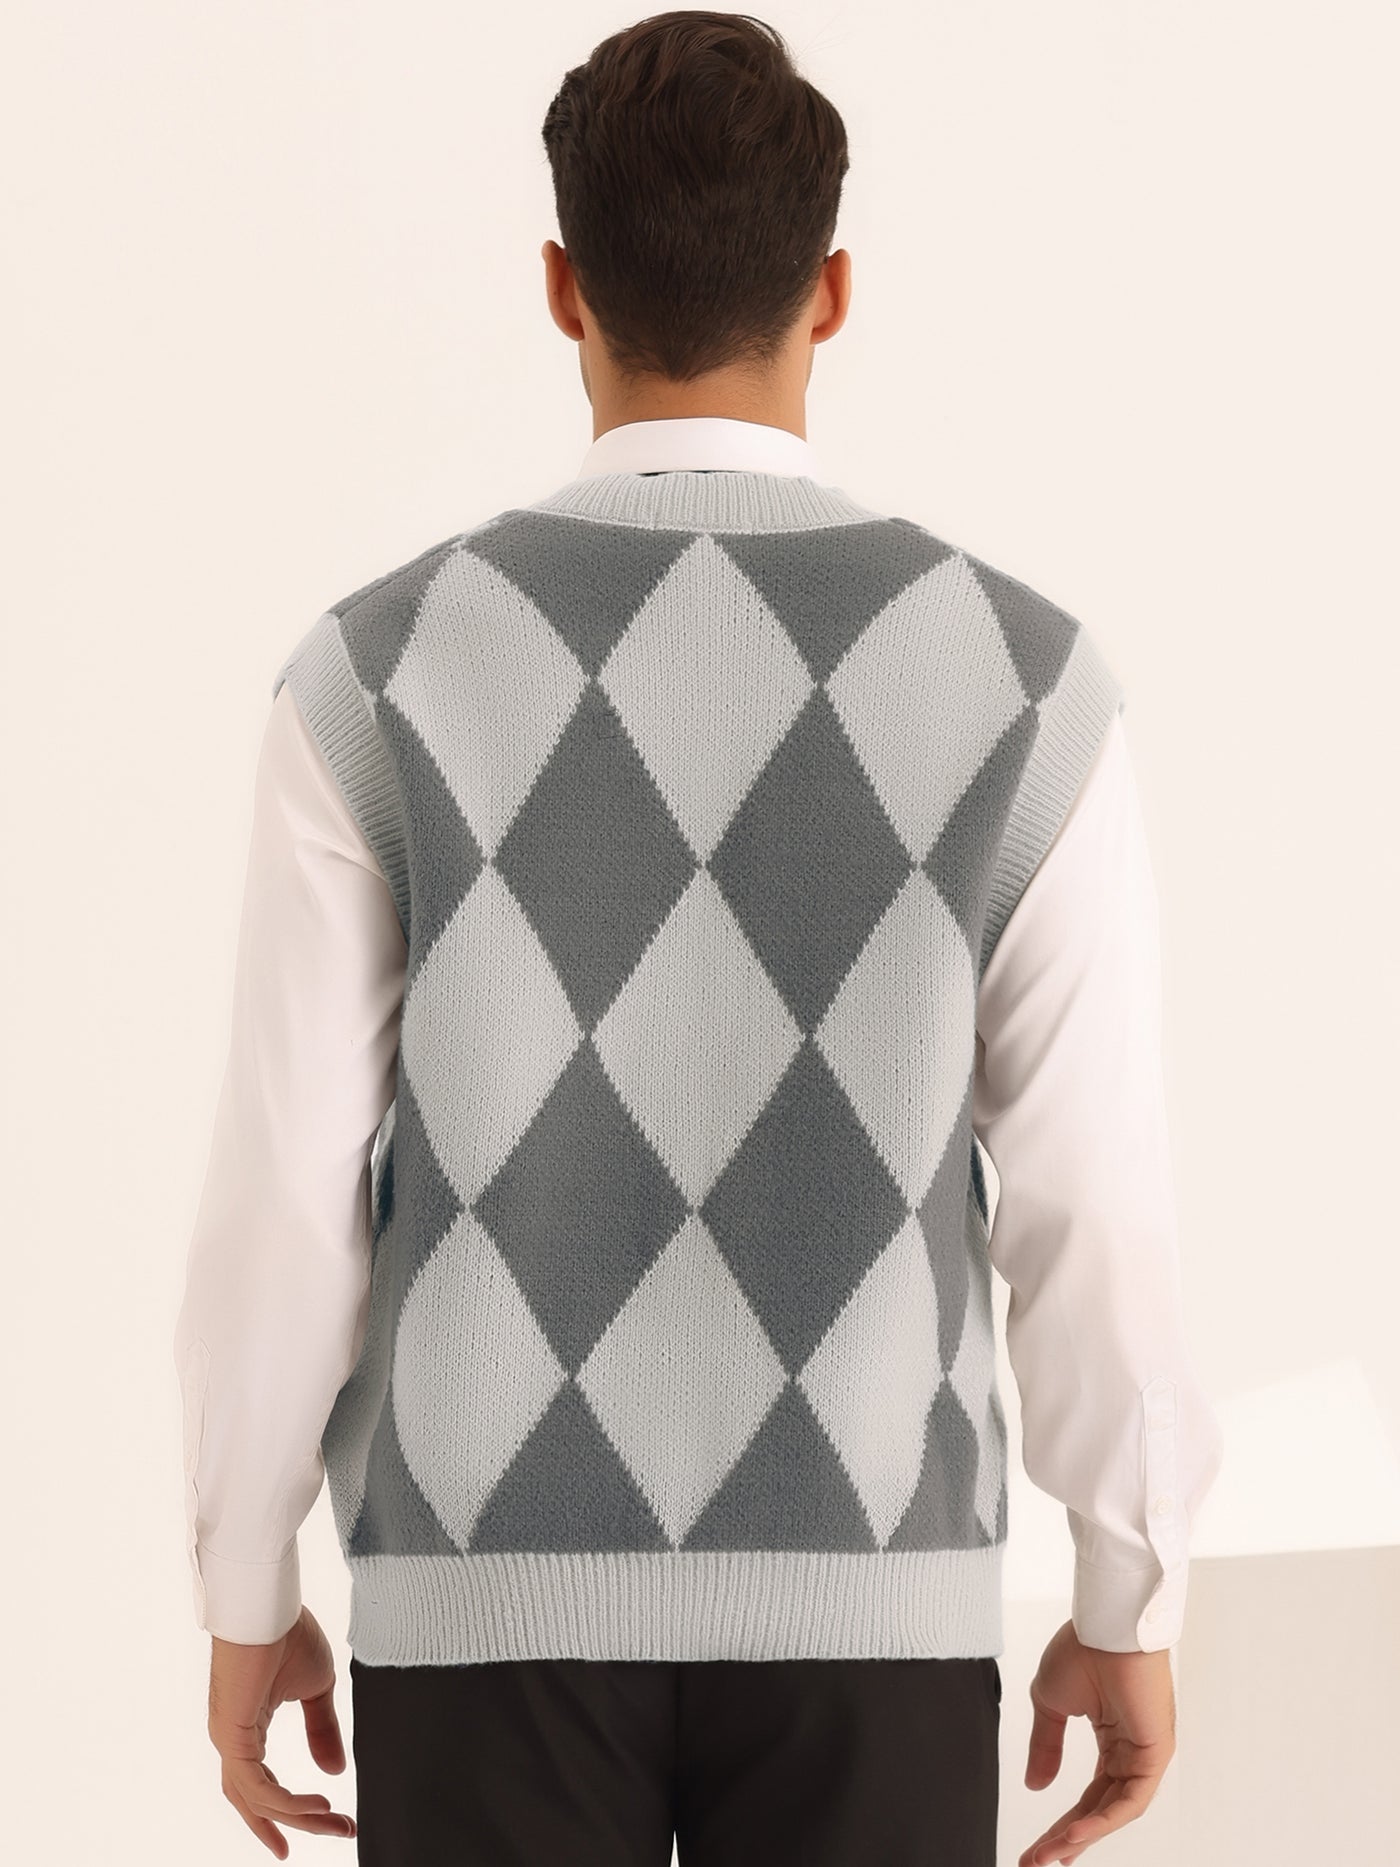 Bublédon Argyle Pattern Sweater Vests for Men's Classic V Neck Sleeveless Pullover Knit Sweaters